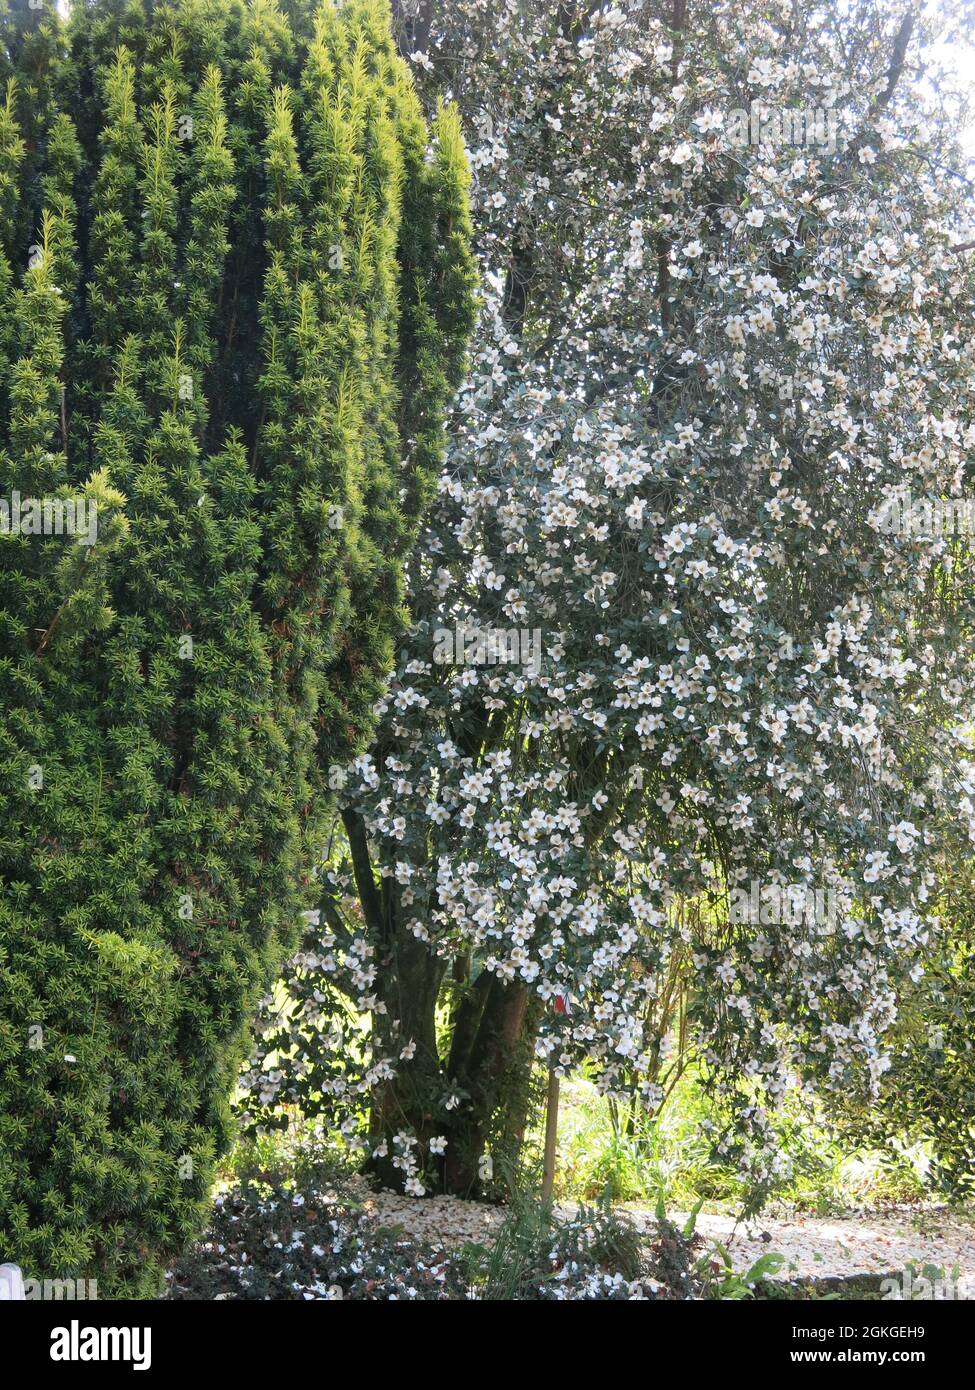 Eucryphia 'Nymansay' is a tall tree with a columnar habit, covered in large white flowers in summer, thriving in light woodland alongside a conifer. Stock Photo